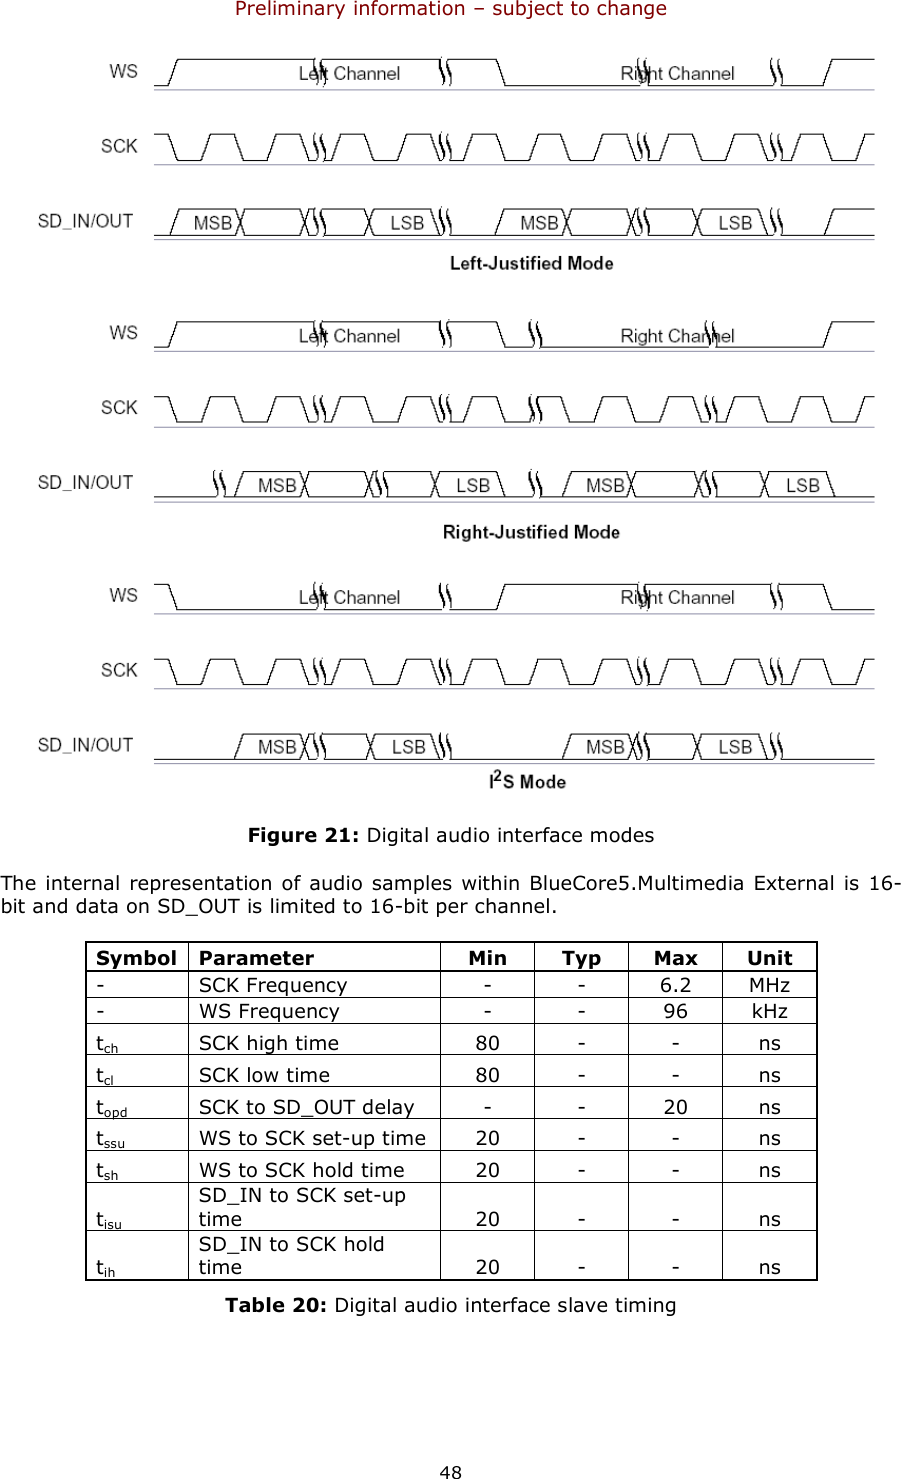 Preliminary information – subject to change  48  Figure 21: Digital audio interface modes The internal representation of audio samples within BlueCore5.Multimedia External is 16-bit and data on SD_OUT is limited to 16-bit per channel. Symbol Parameter  Min  Typ  Max  Unit -  SCK Frequency  -  -  6.2  MHz -  WS Frequency  -  -  96  kHz tch  SCK high time  80  -  -  ns tcl  SCK low time  80  -  -  ns topd  SCK to SD_OUT delay  -  -  20  ns tssu  WS to SCK set-up time  20  -  -  ns tsh  WS to SCK hold time  20  -  -  ns tisu SD_IN to SCK set-up time  20  -  -  ns tih SD_IN to SCK hold time  20  -  -  ns Table 20: Digital audio interface slave timing  